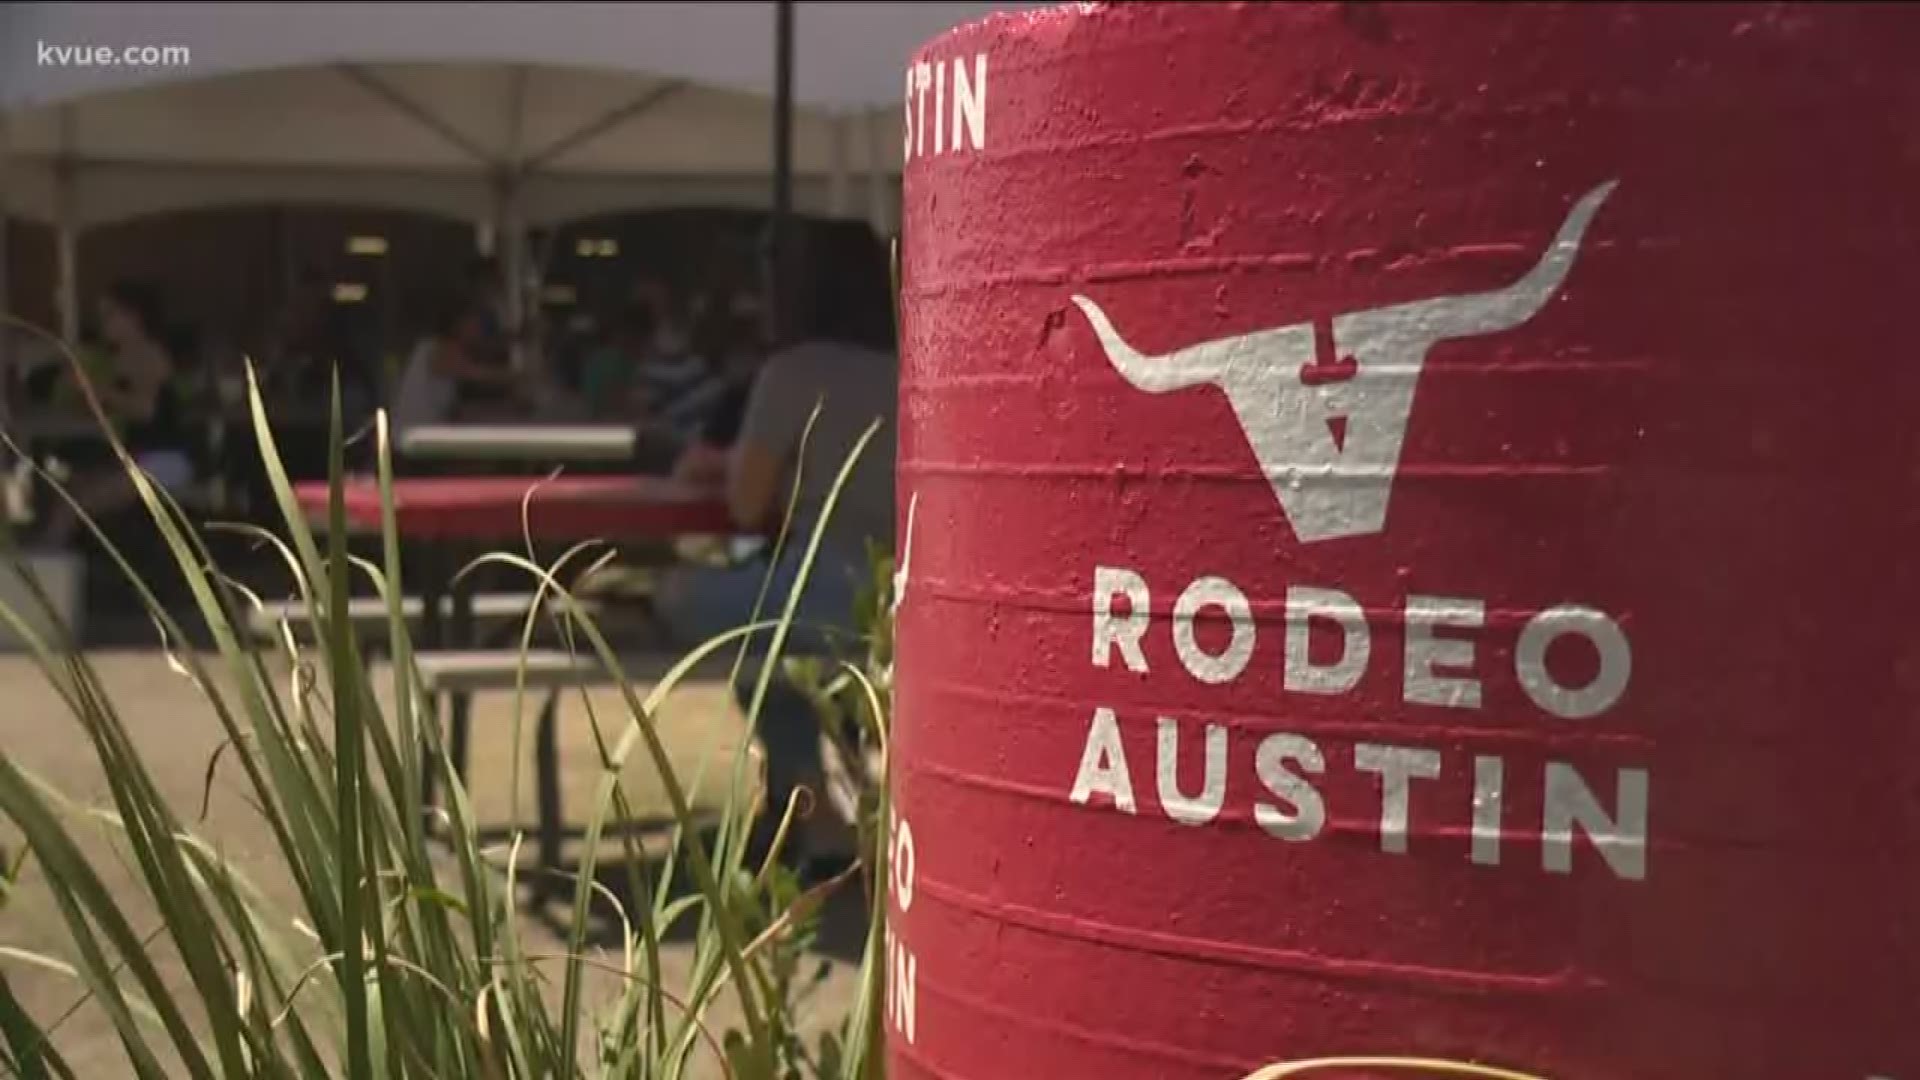 Nearly 300,000 people are expected to head to Rodeo Austin this month. Kalyn Norwood tells us what kind of things people can expect.